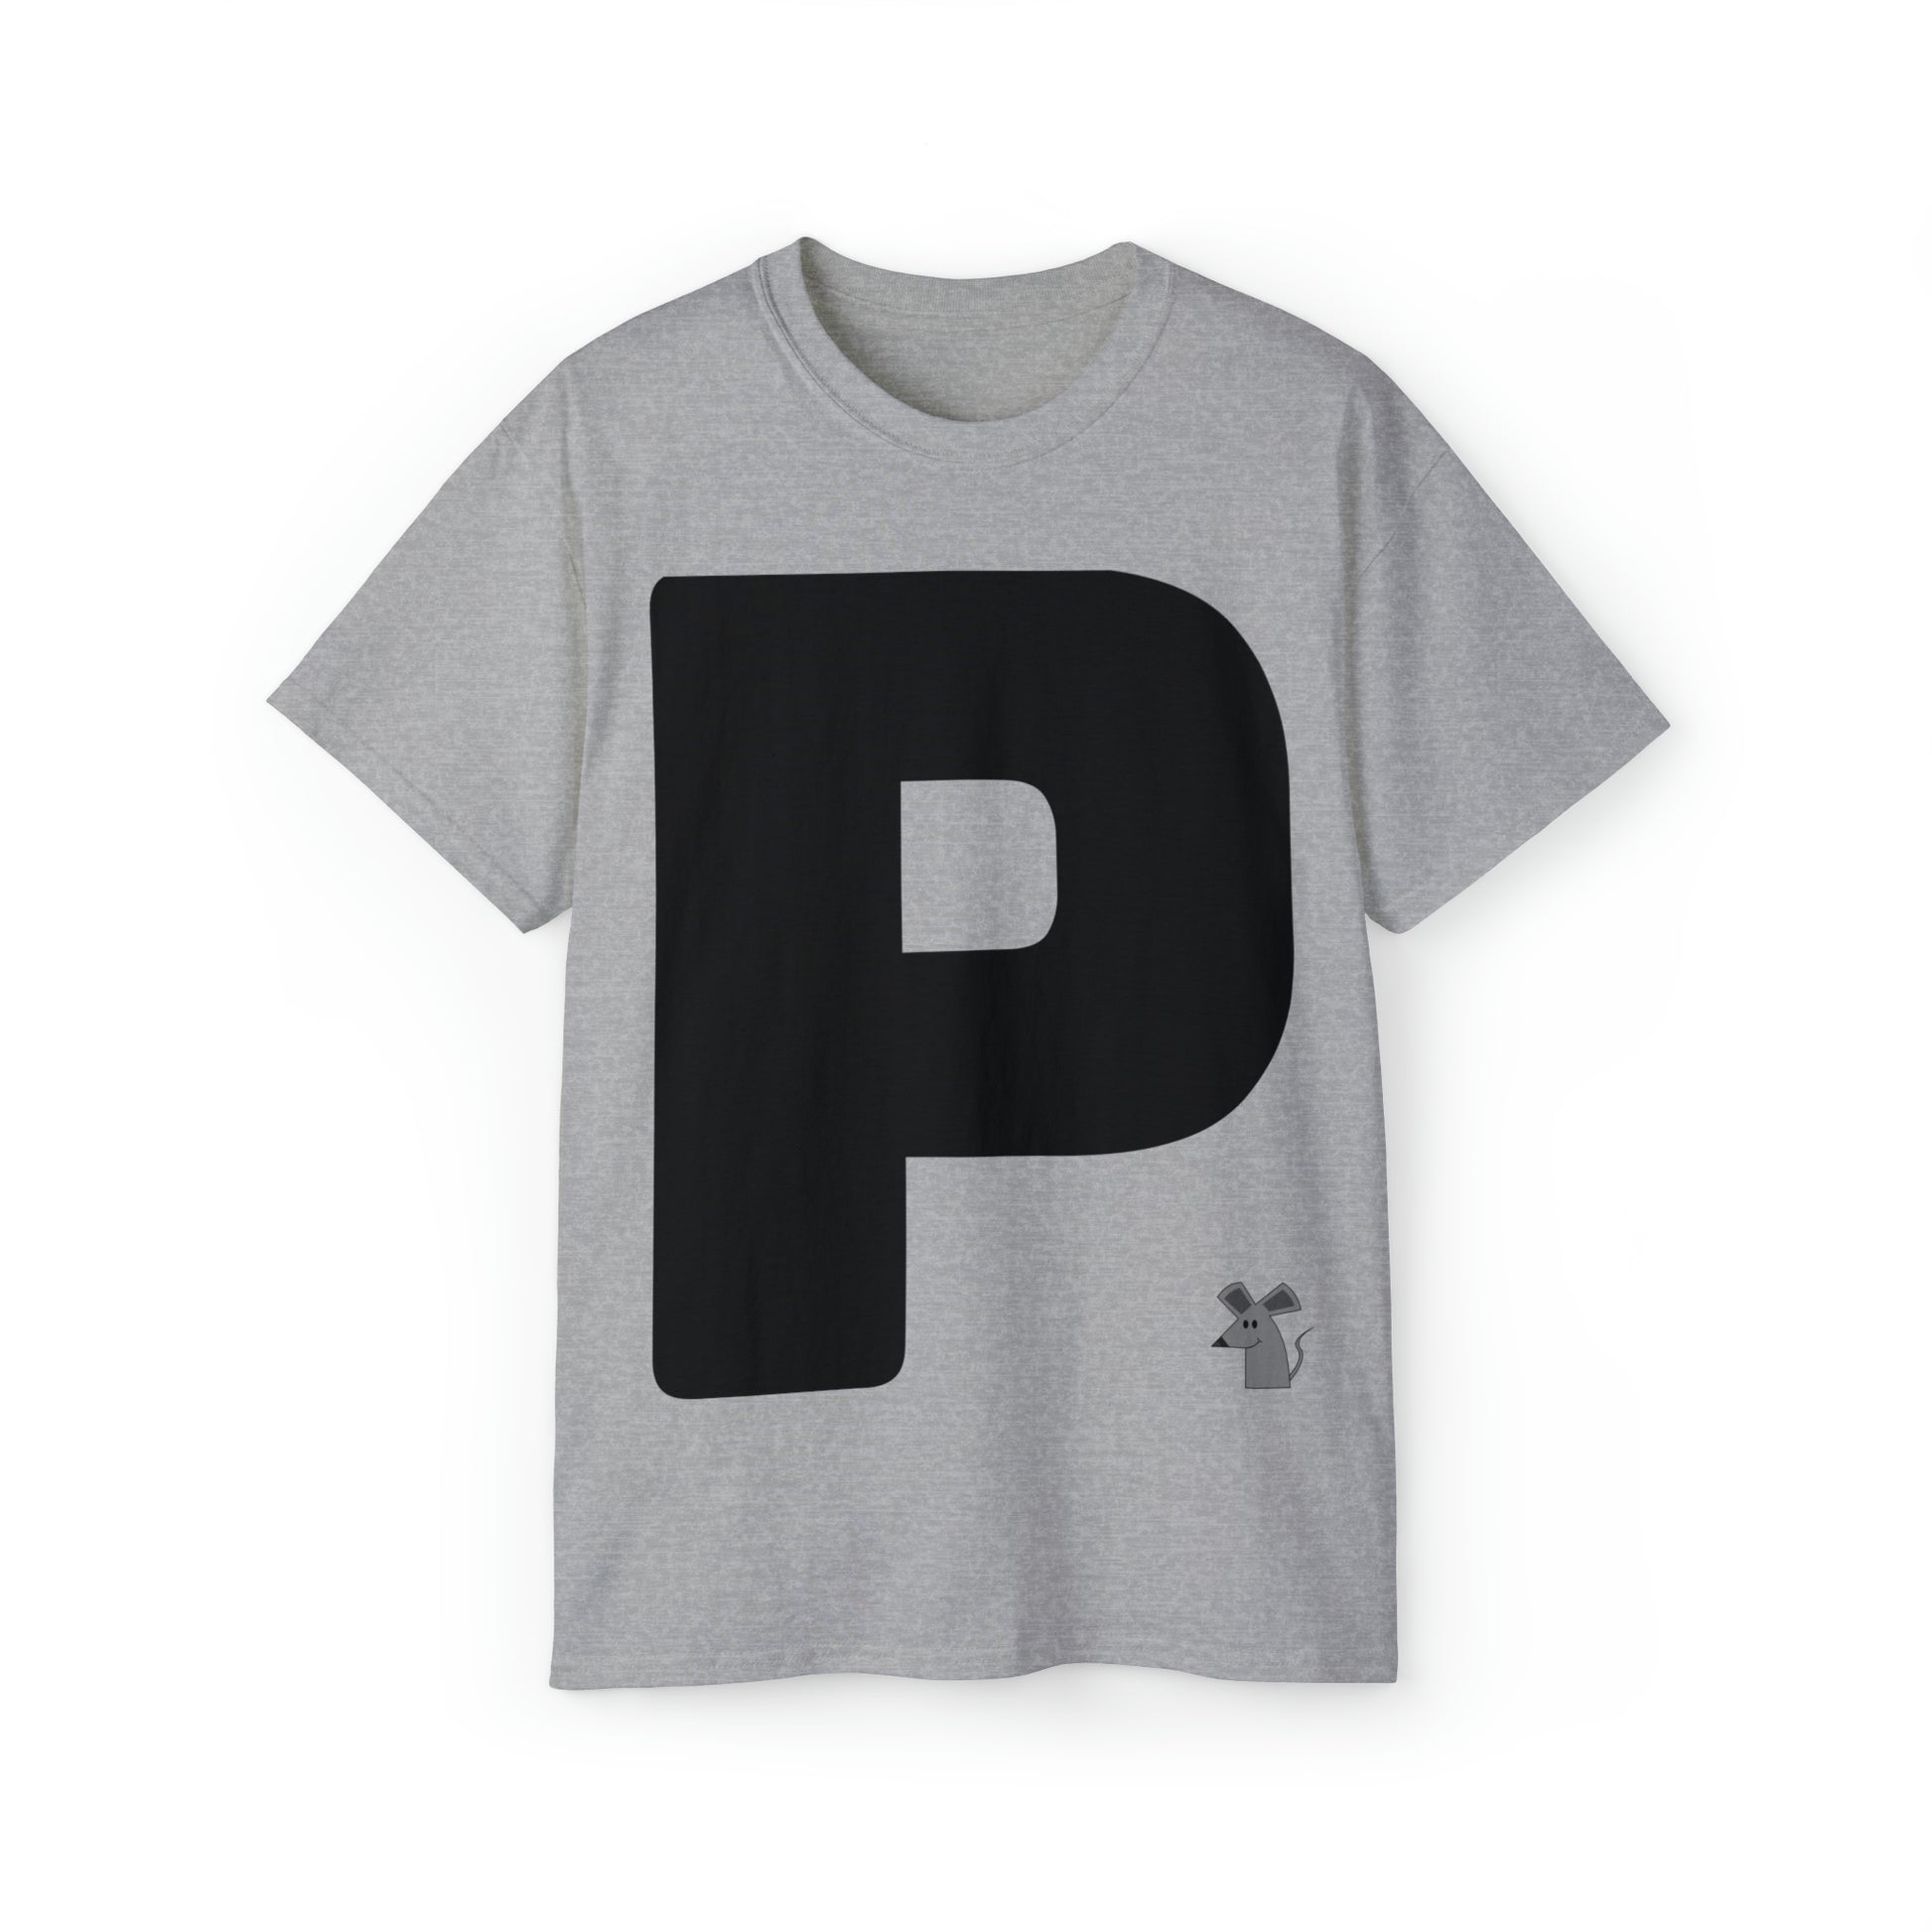 P and mouse tshirt